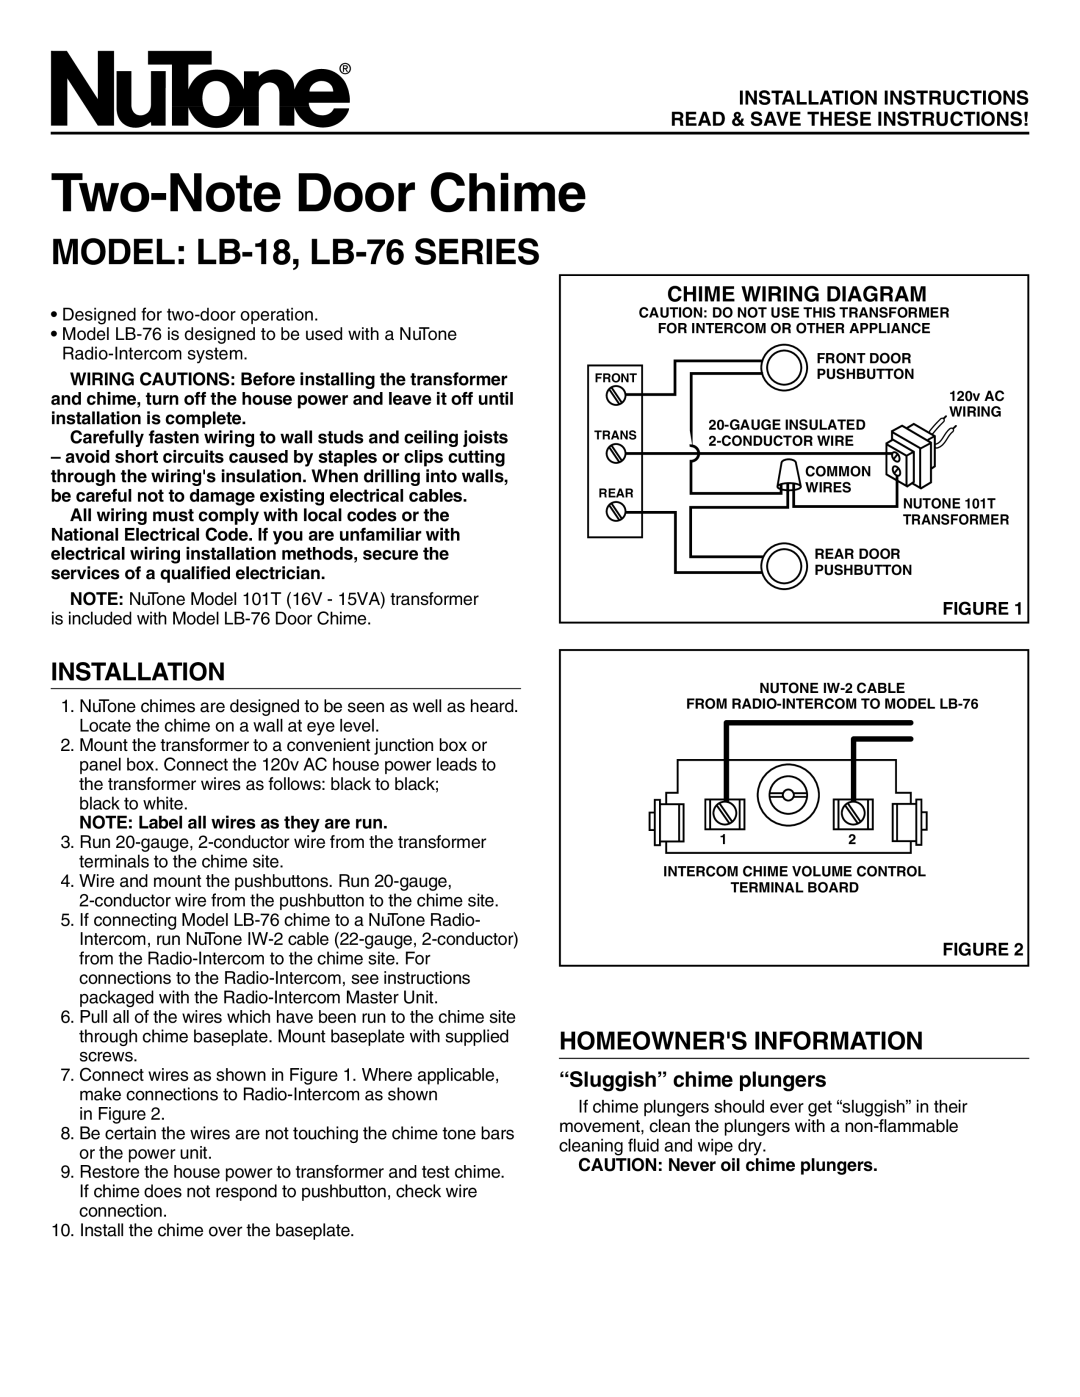 NuTone installation instructions Two-NoteDoor Chime, MODEL LB-18, LB-76SERIES, Installation, Homeowners Information 